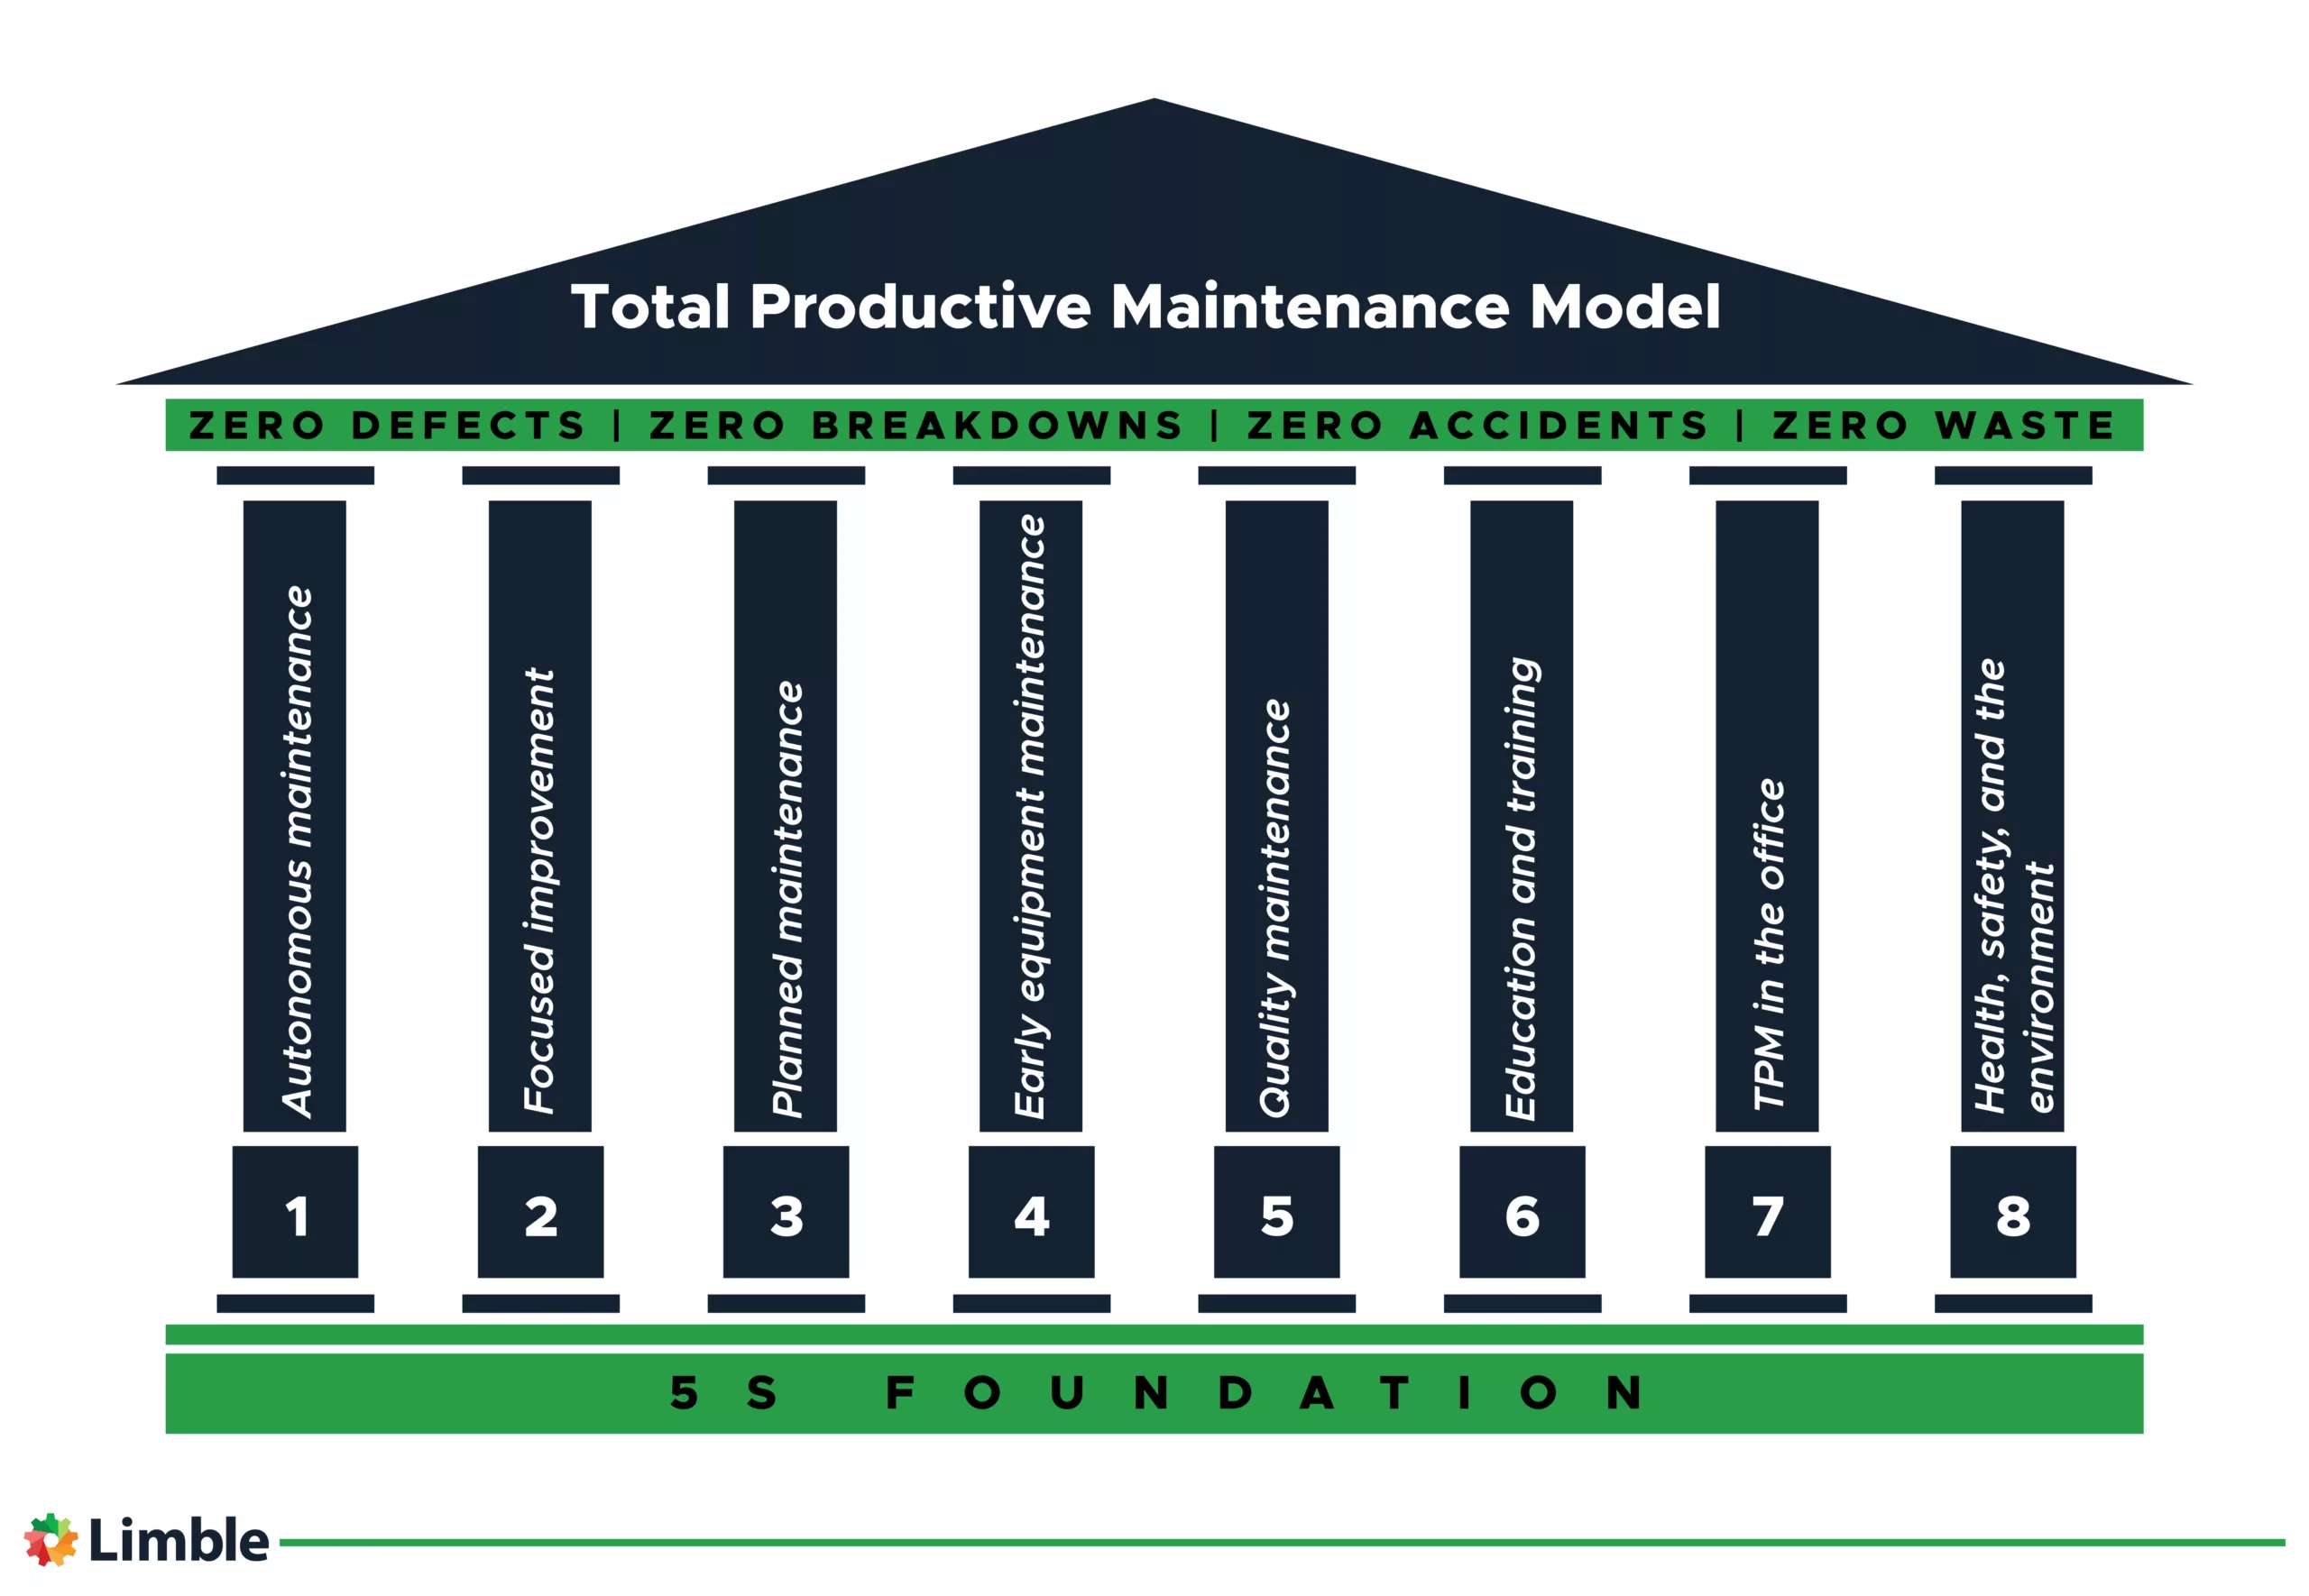 The Total Productive Maintenance model.